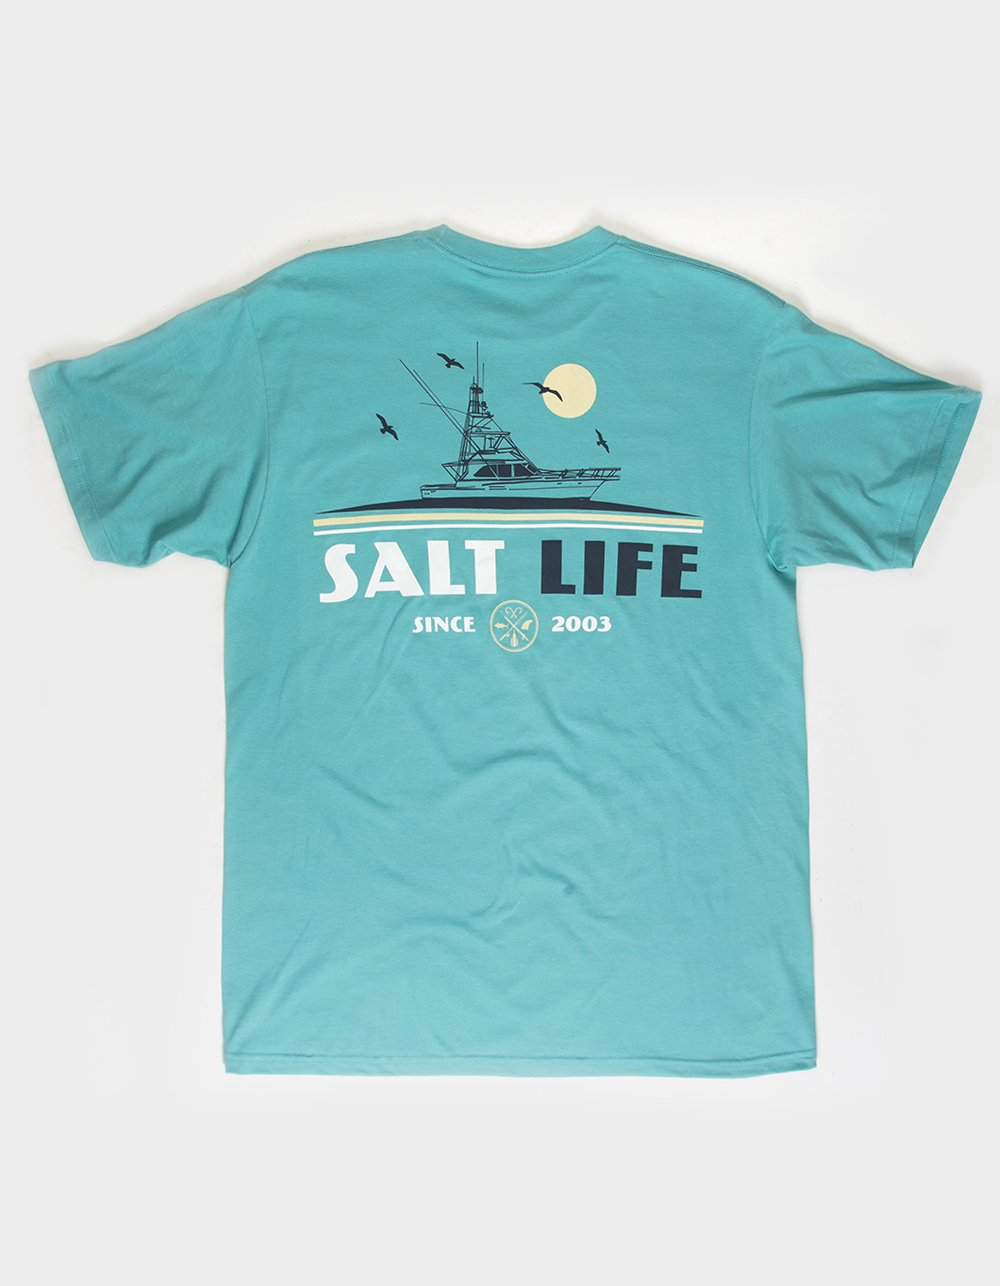 SALT LIFE Day In The Life Mens Tee - TEAL GREEN | Tillys